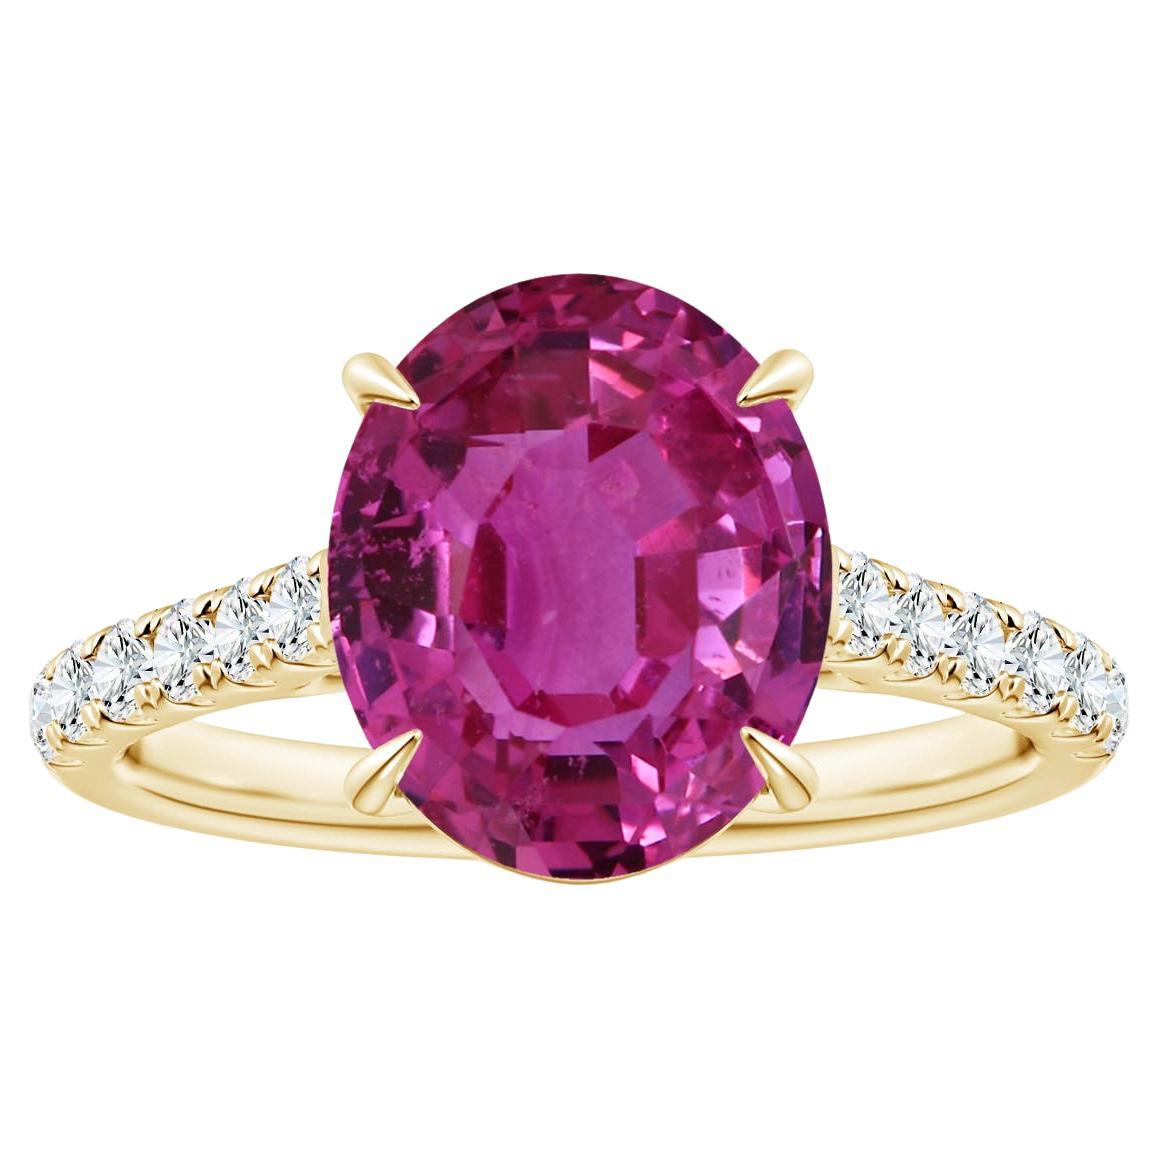 ANGARA Claw-Set GIA Certified Pink Sapphire Ring in Yellow Gold with Diamonds